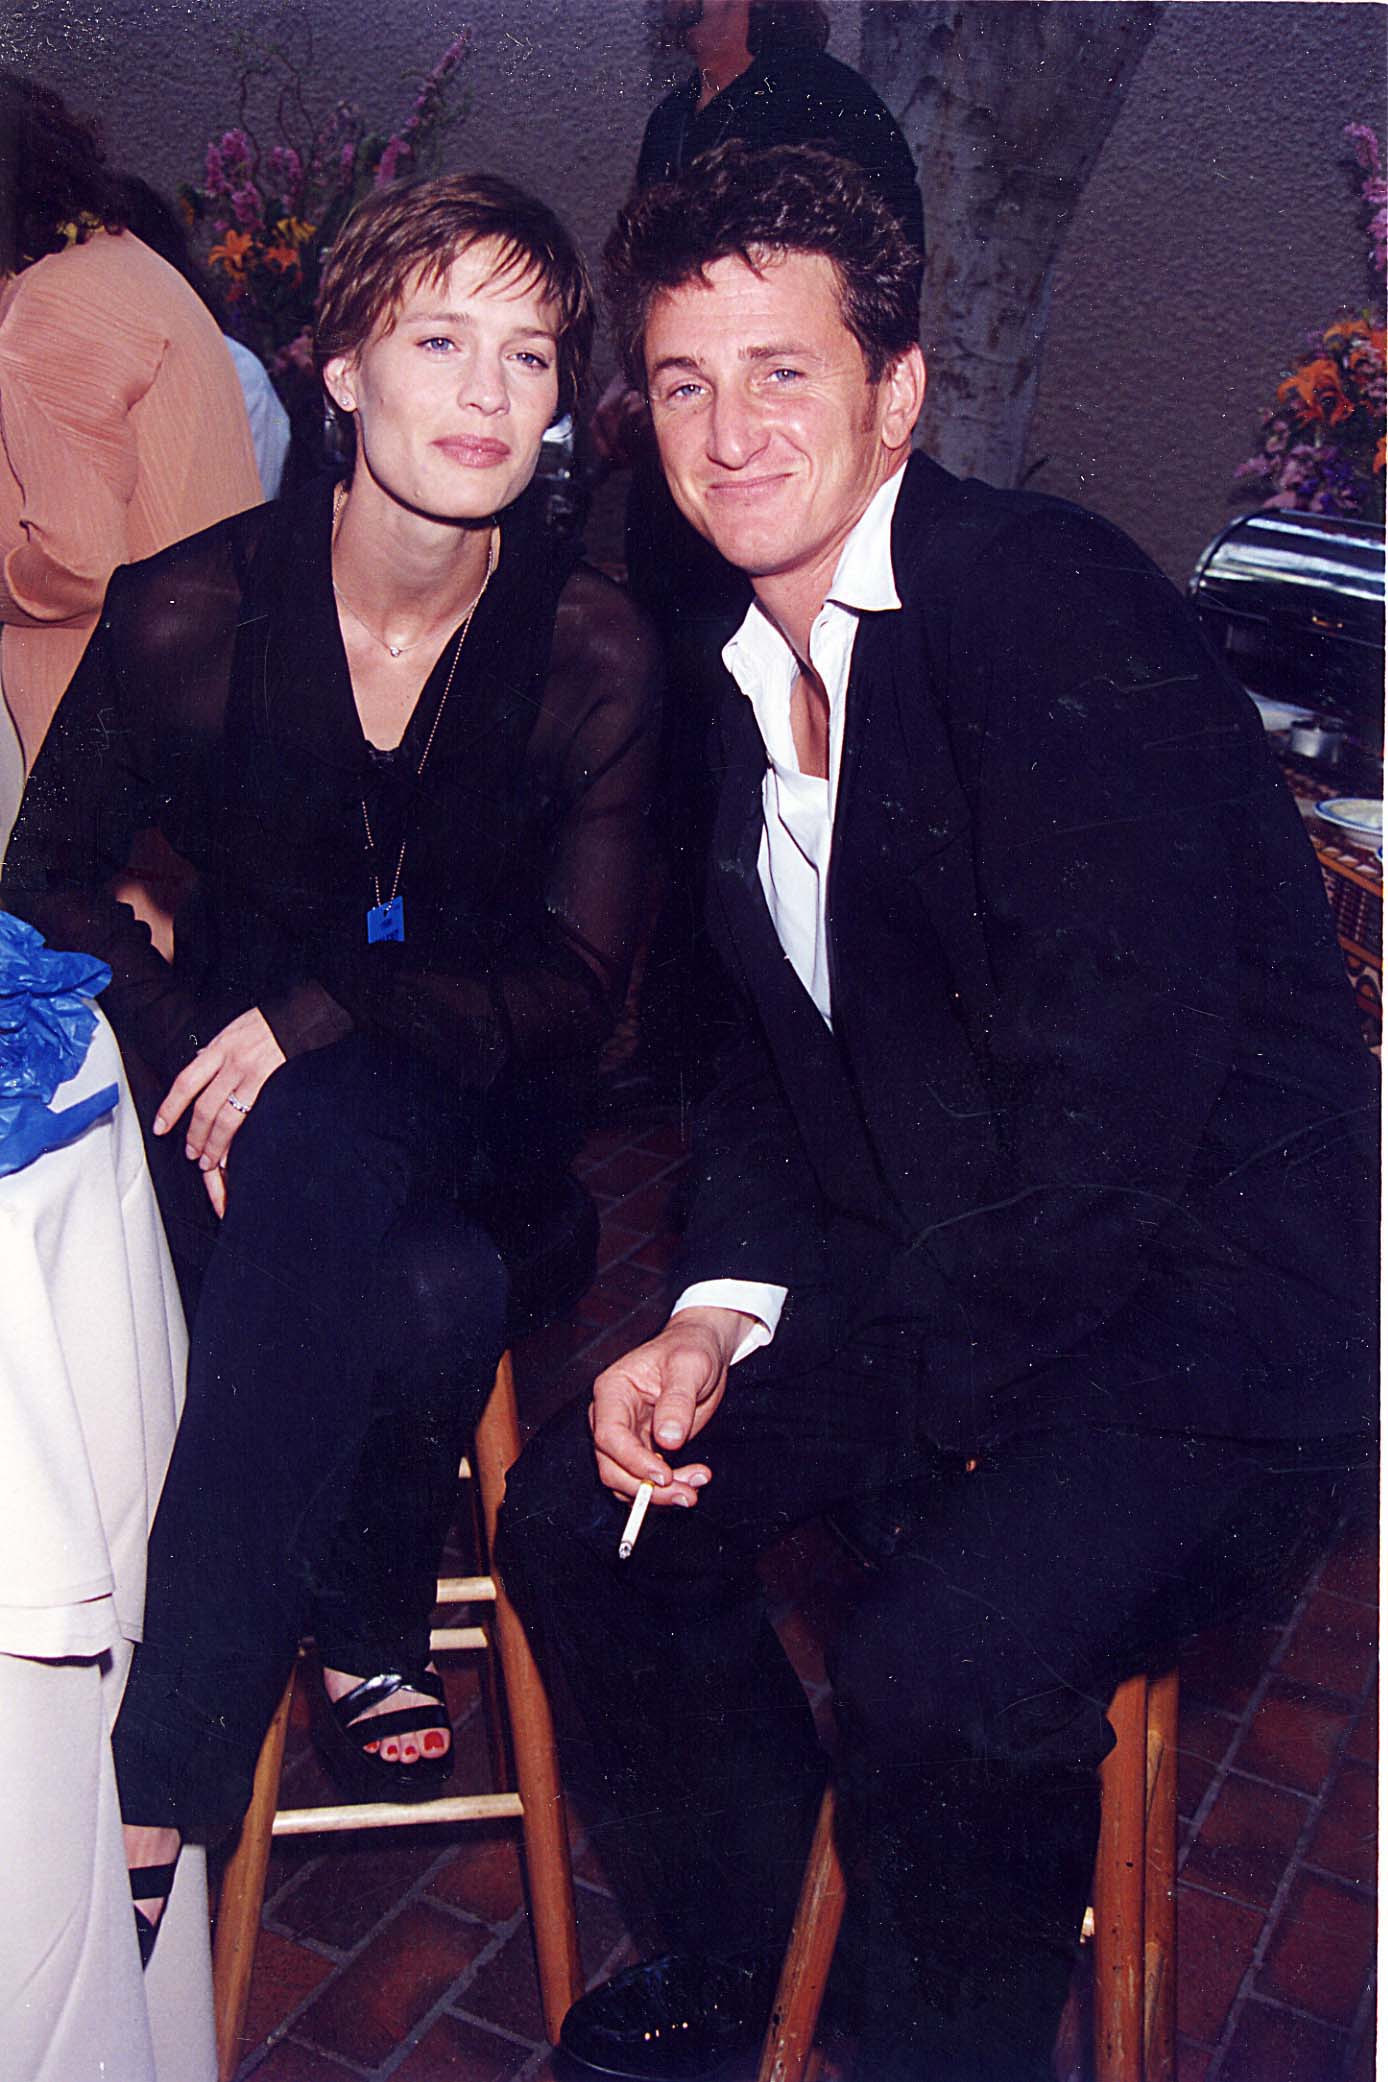 Robin Wright and Sean Penn during VH1 Honors in Los Angeles, California in 1996. | Source: Getty Images